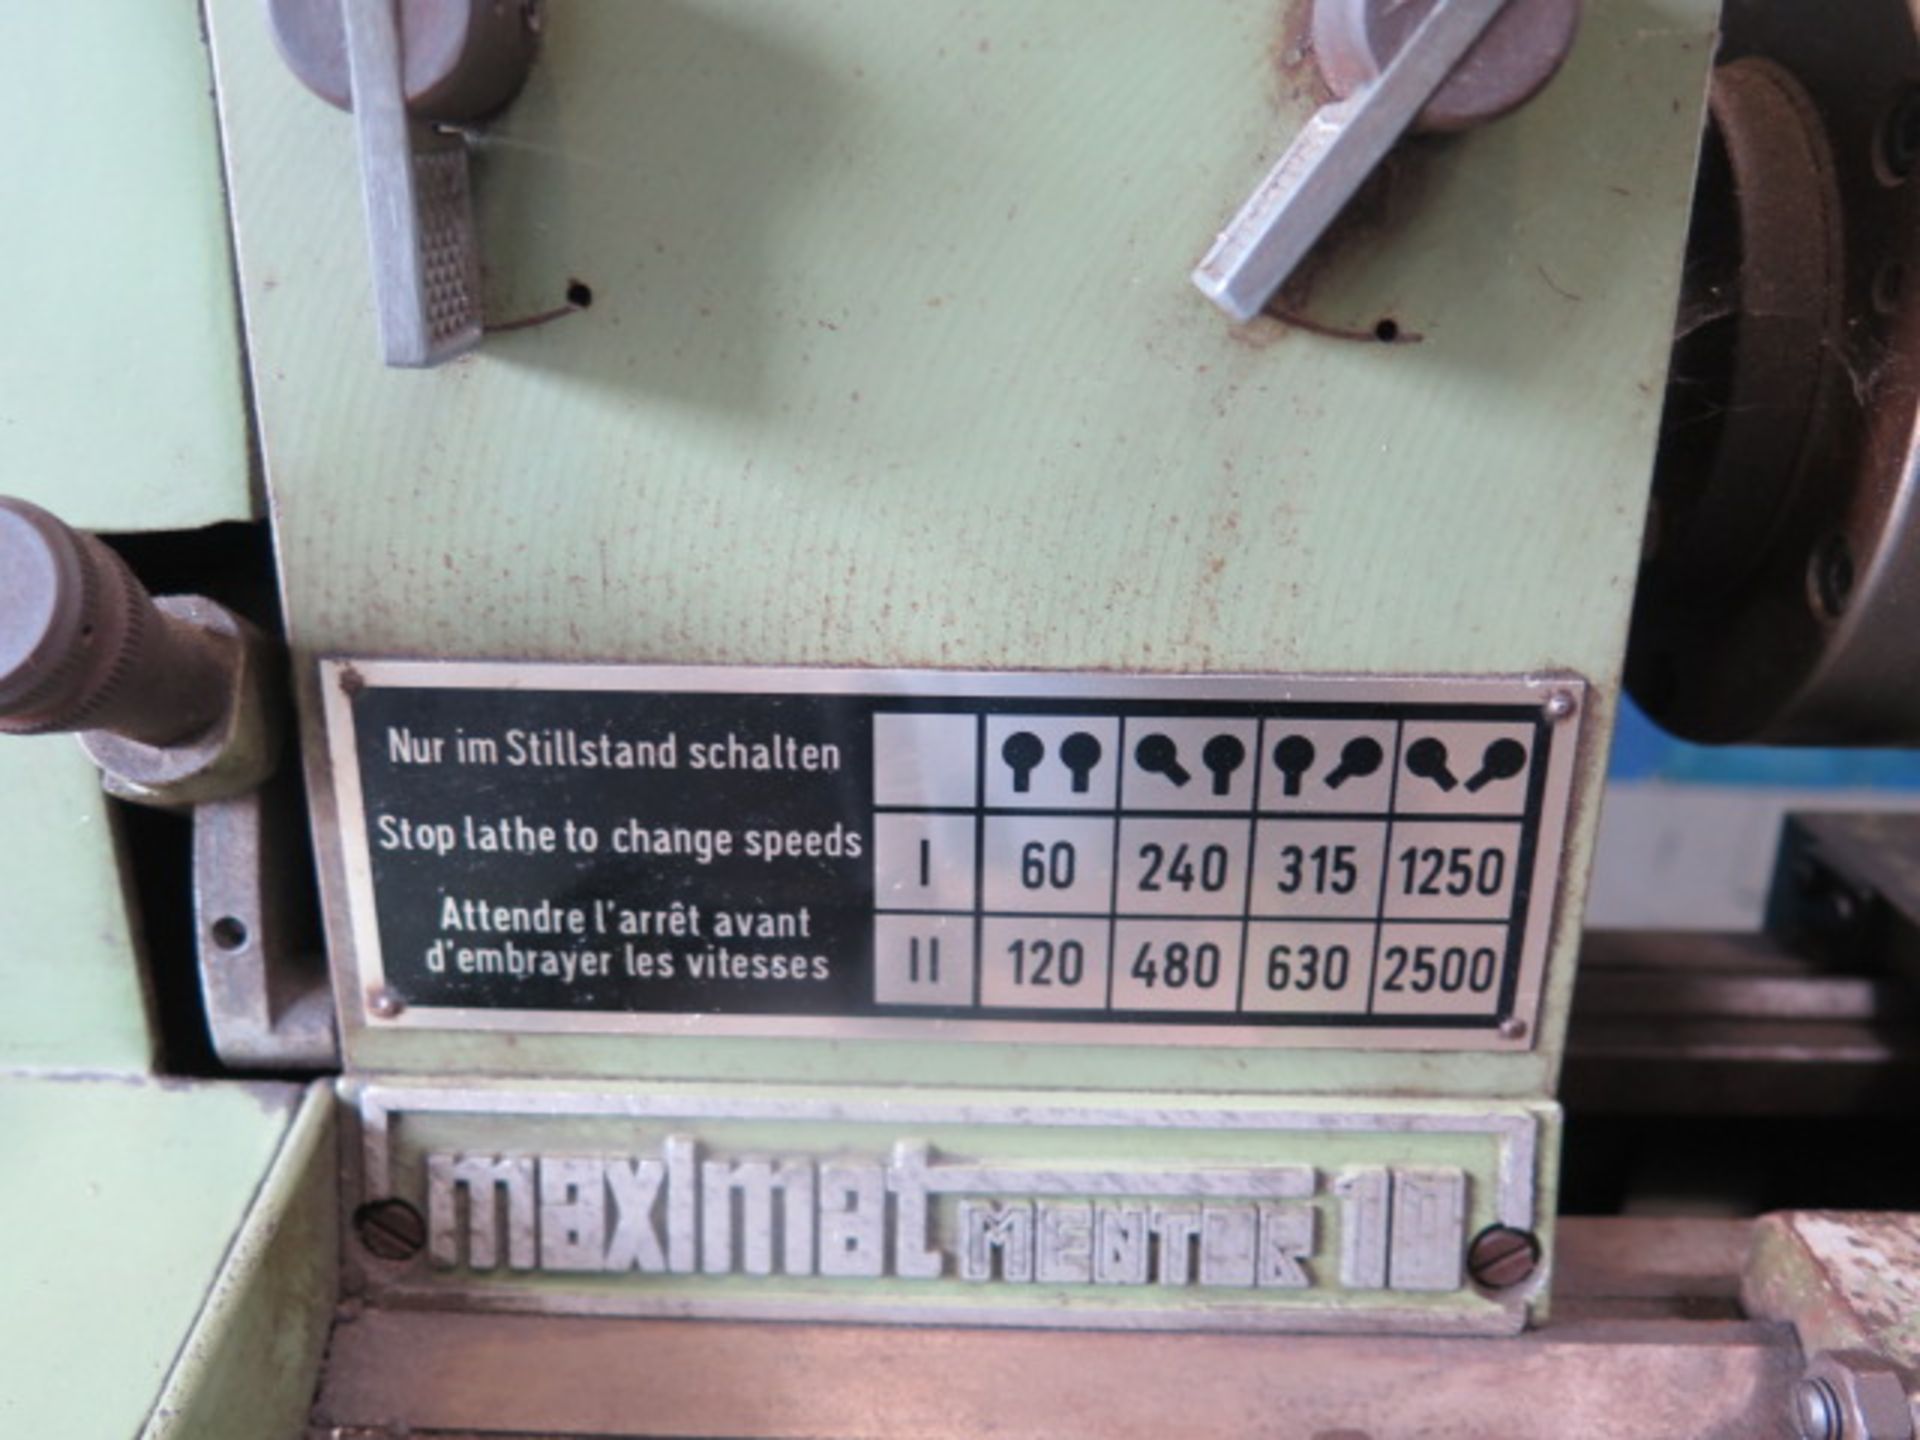 Emco “Maximat Mentor 10” Mill / Drill Machine w/ 60-2500 RPM (SOLD AS-IS - NO WARRANTY) - Image 7 of 16